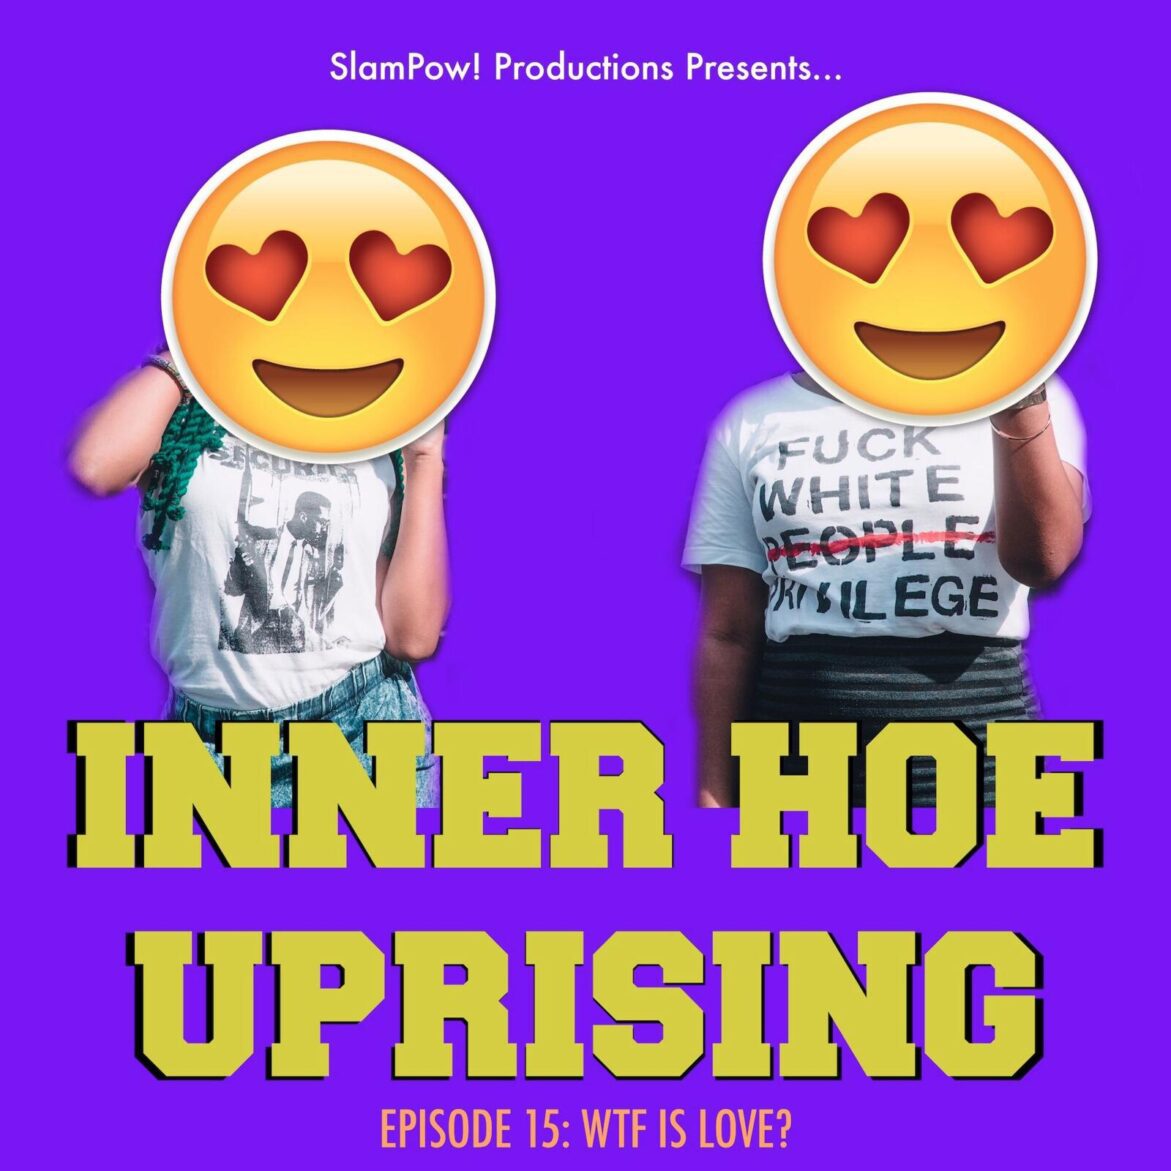 Black Podcasting - S1 Ep15: WTF Is Love?